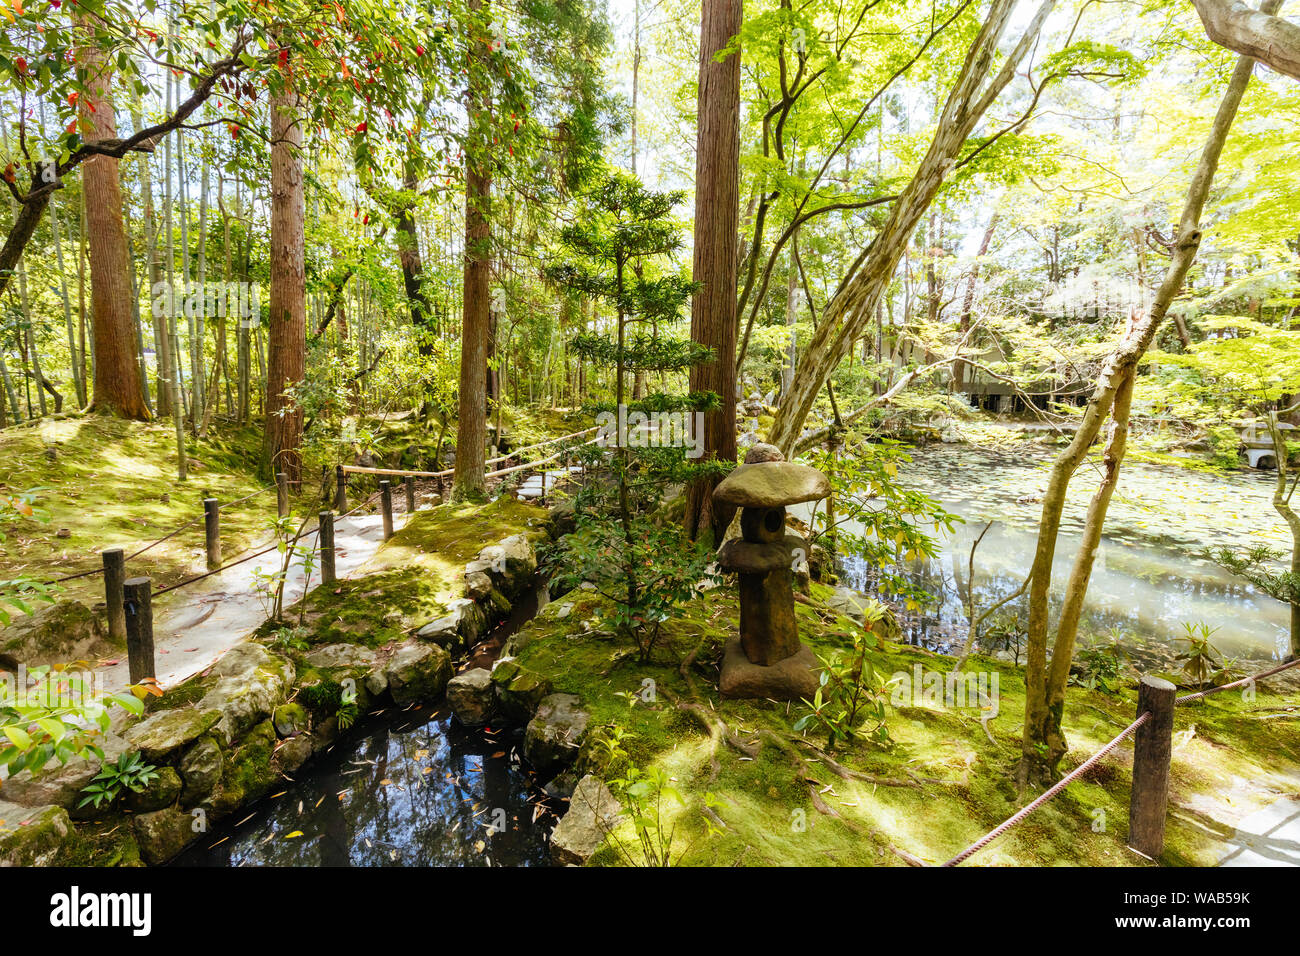 The beautiful Tenju-an Temple on a spring day in Kyoto Japan Stock Photo